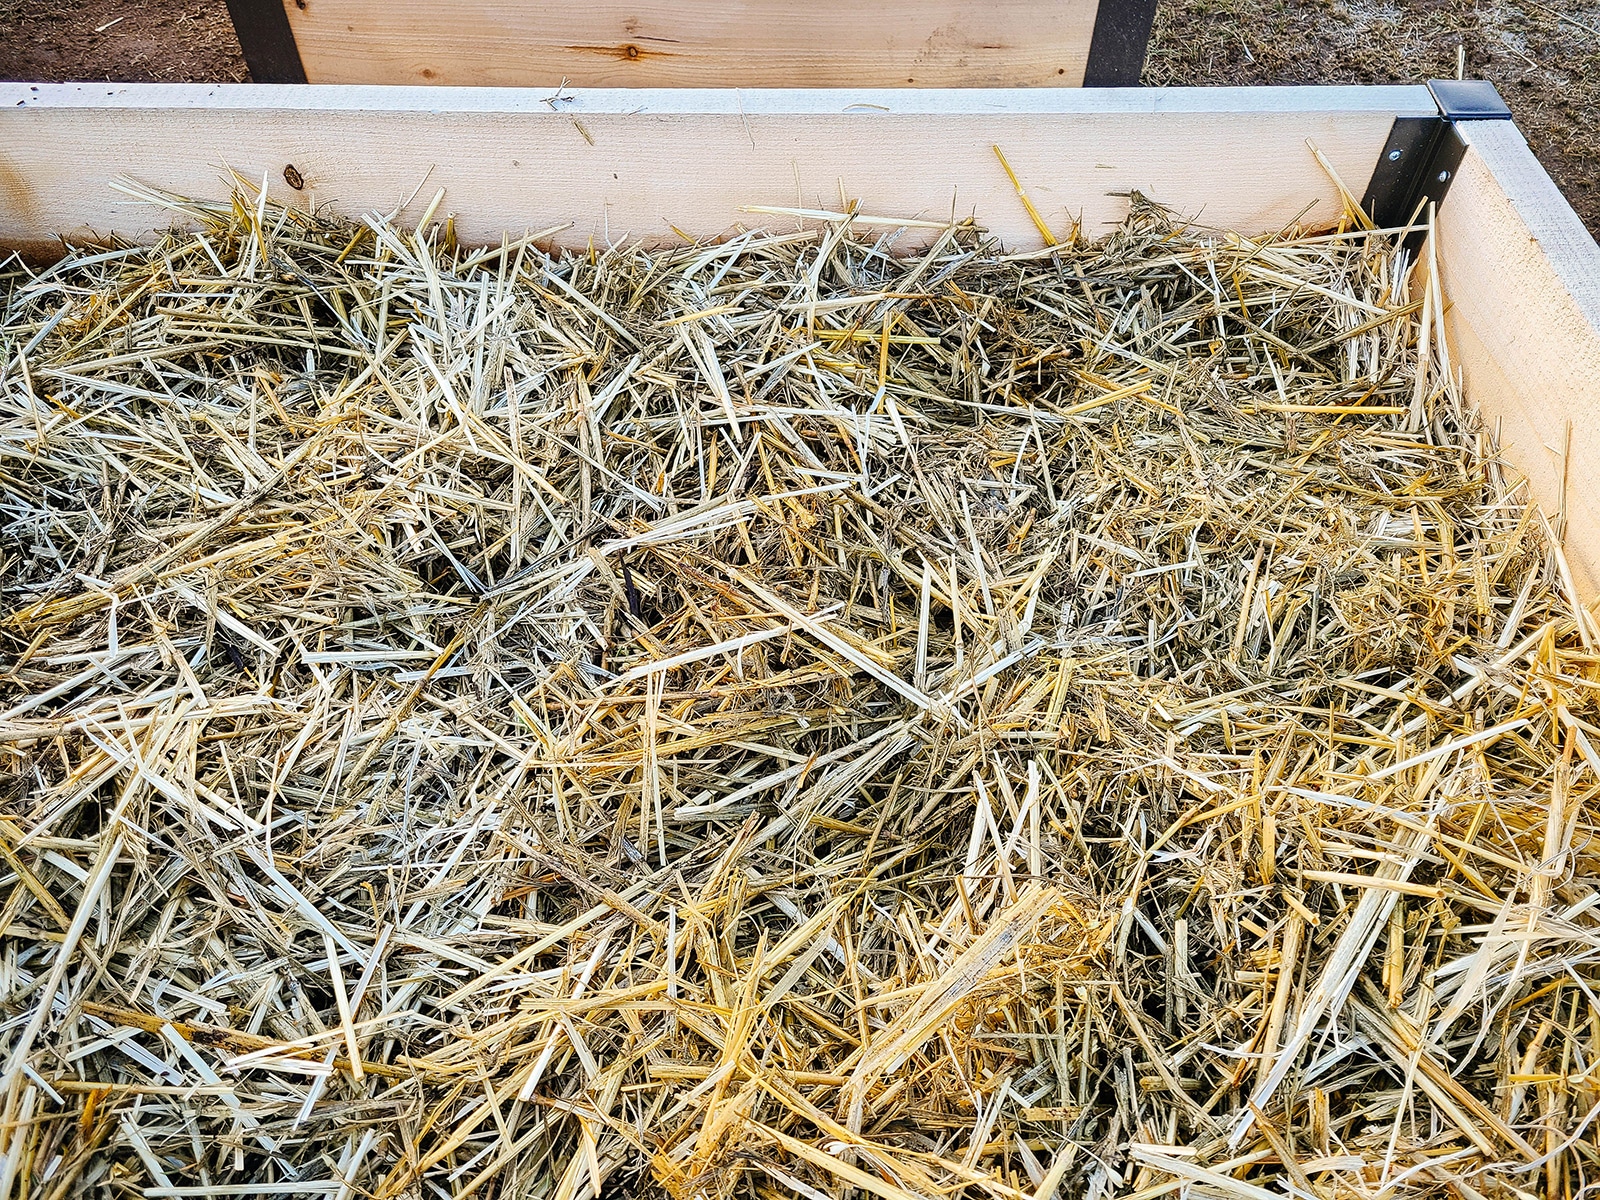 A raised bed covered in straw mulch